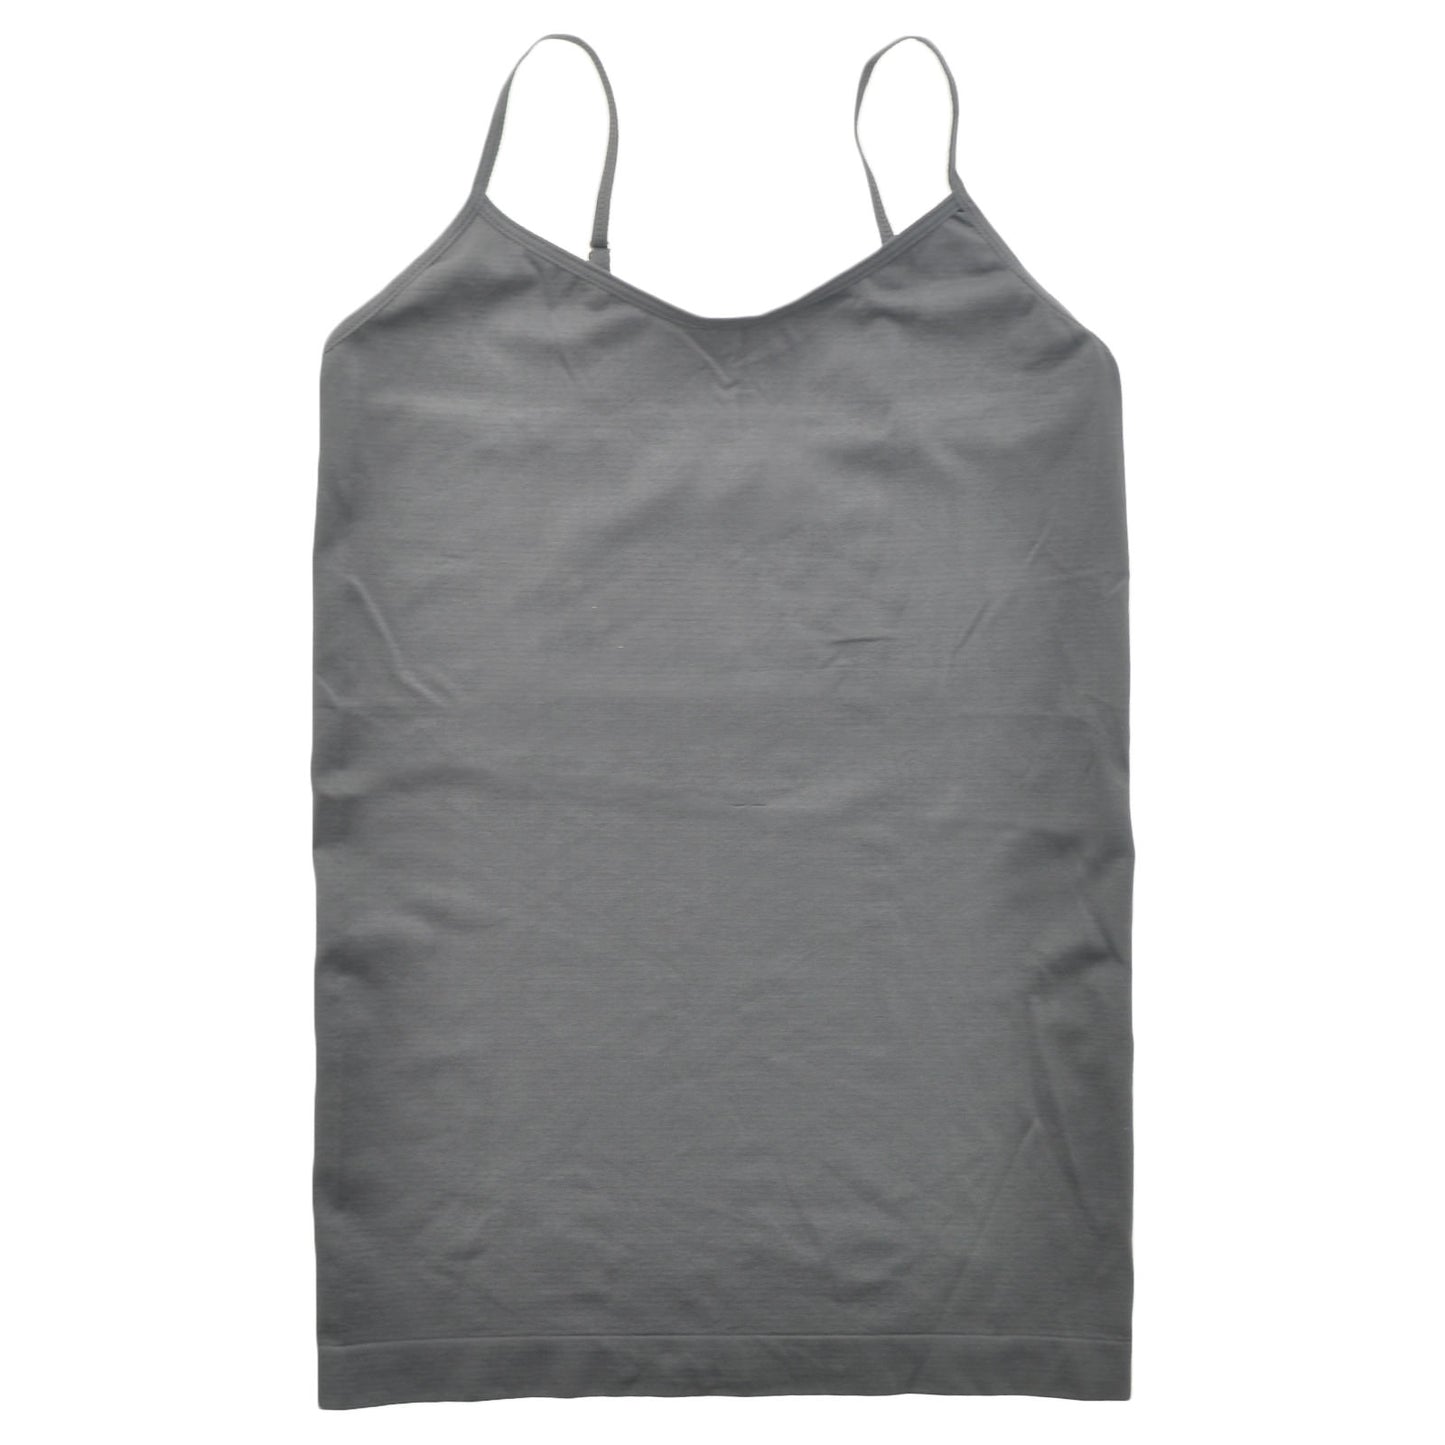 Buy TEUSY Thermal Wear for Women/Ladies Winter Thermal top Sleeveless  Spaghetti (Grey Color) (Grey, Small) at